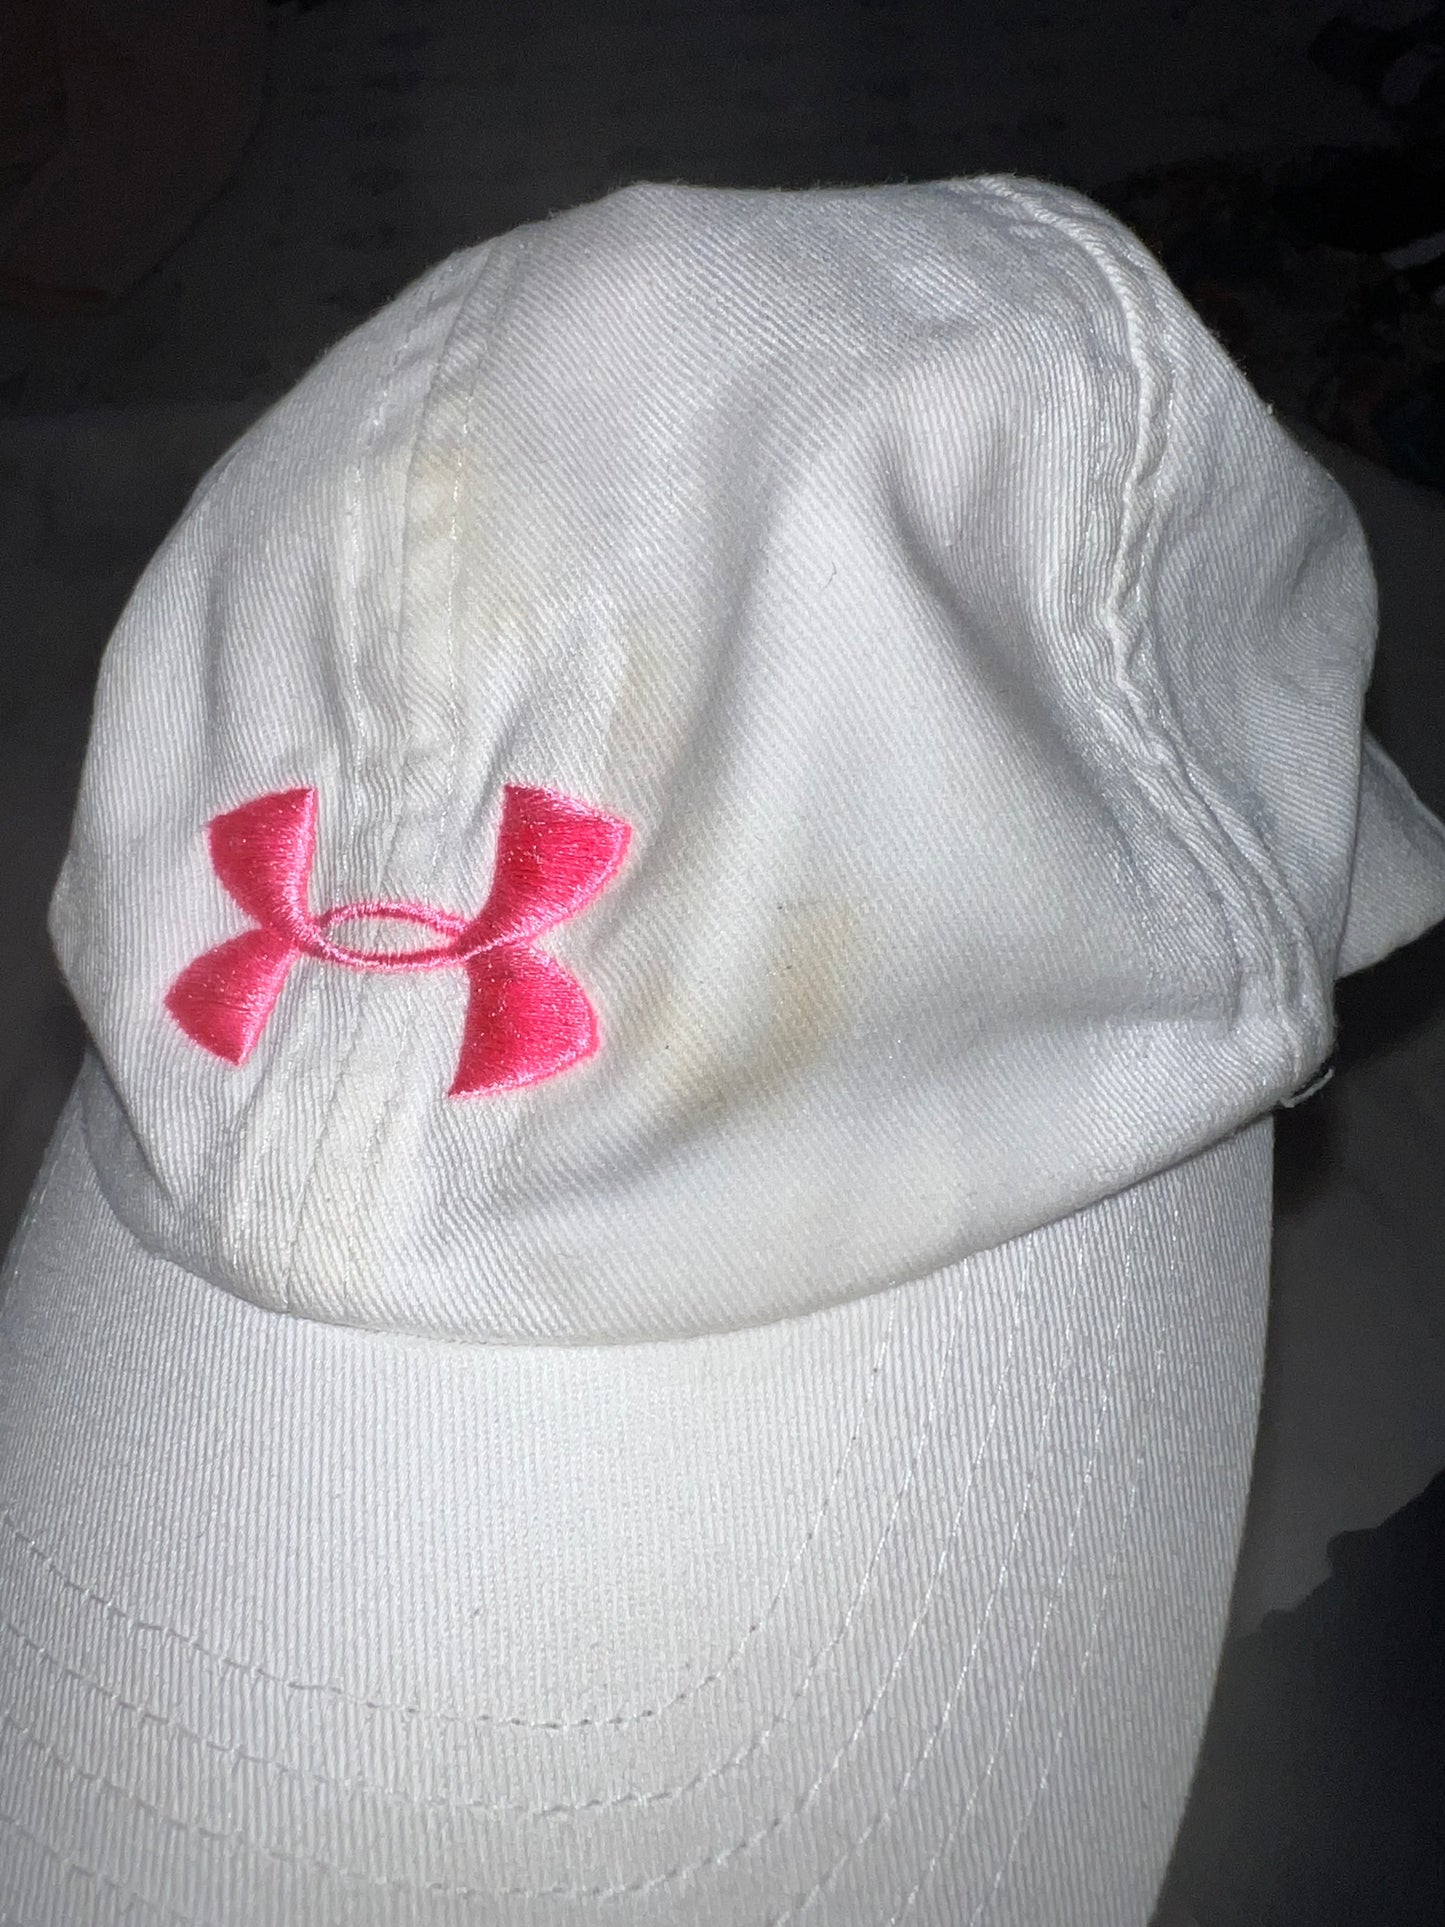 Toddler UA hat 1-3 years, very faint spot, adjustable back